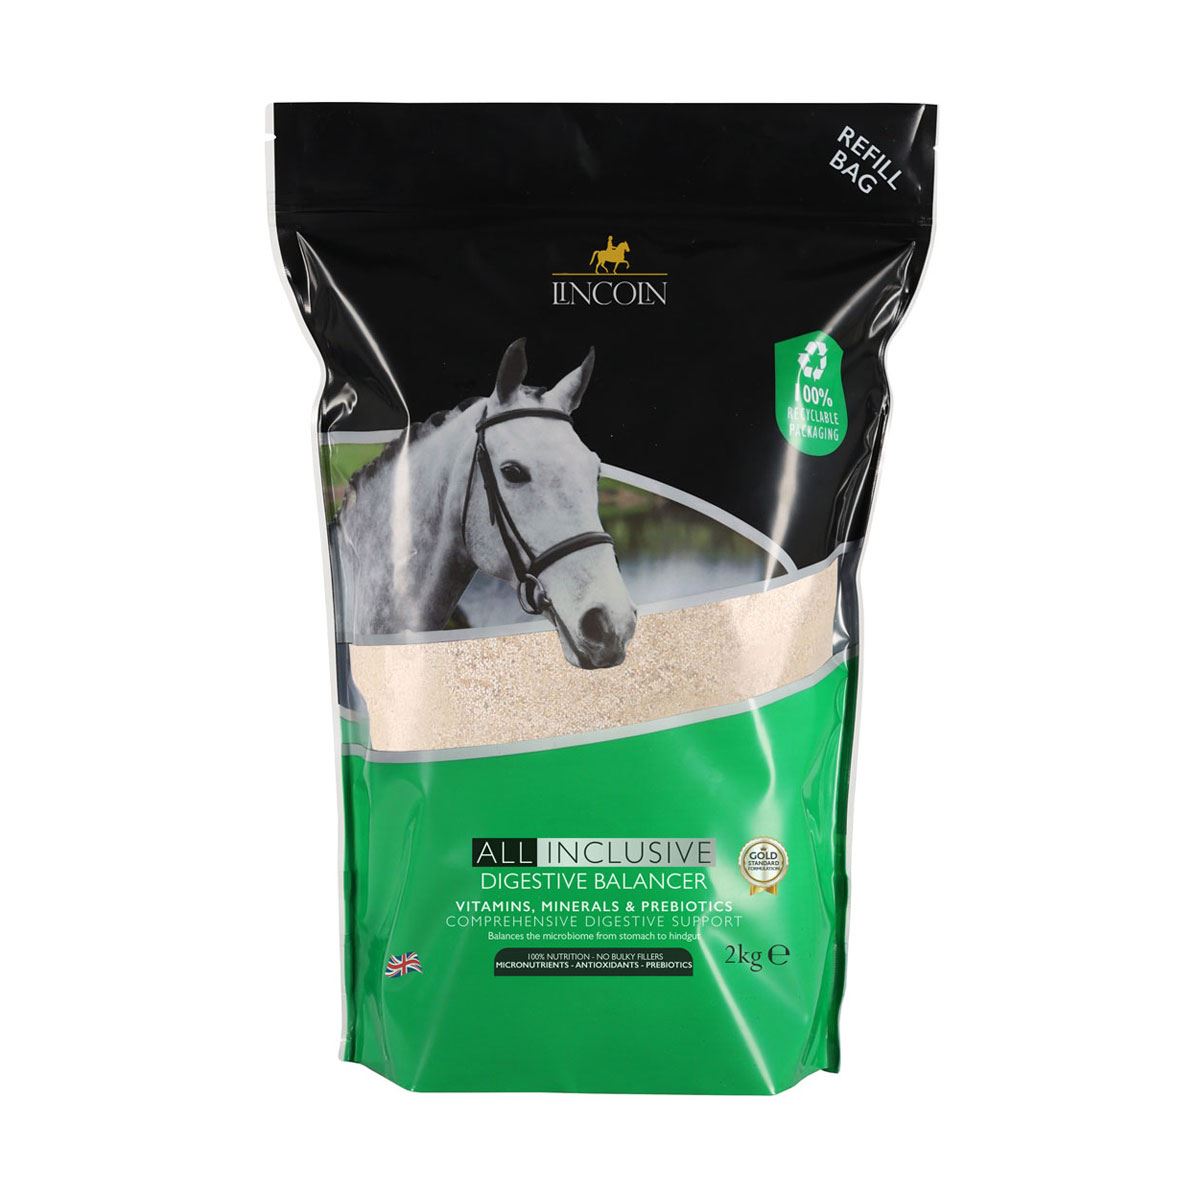 Lincoln All-Inclusive Digestive Balancer for optimal horse health